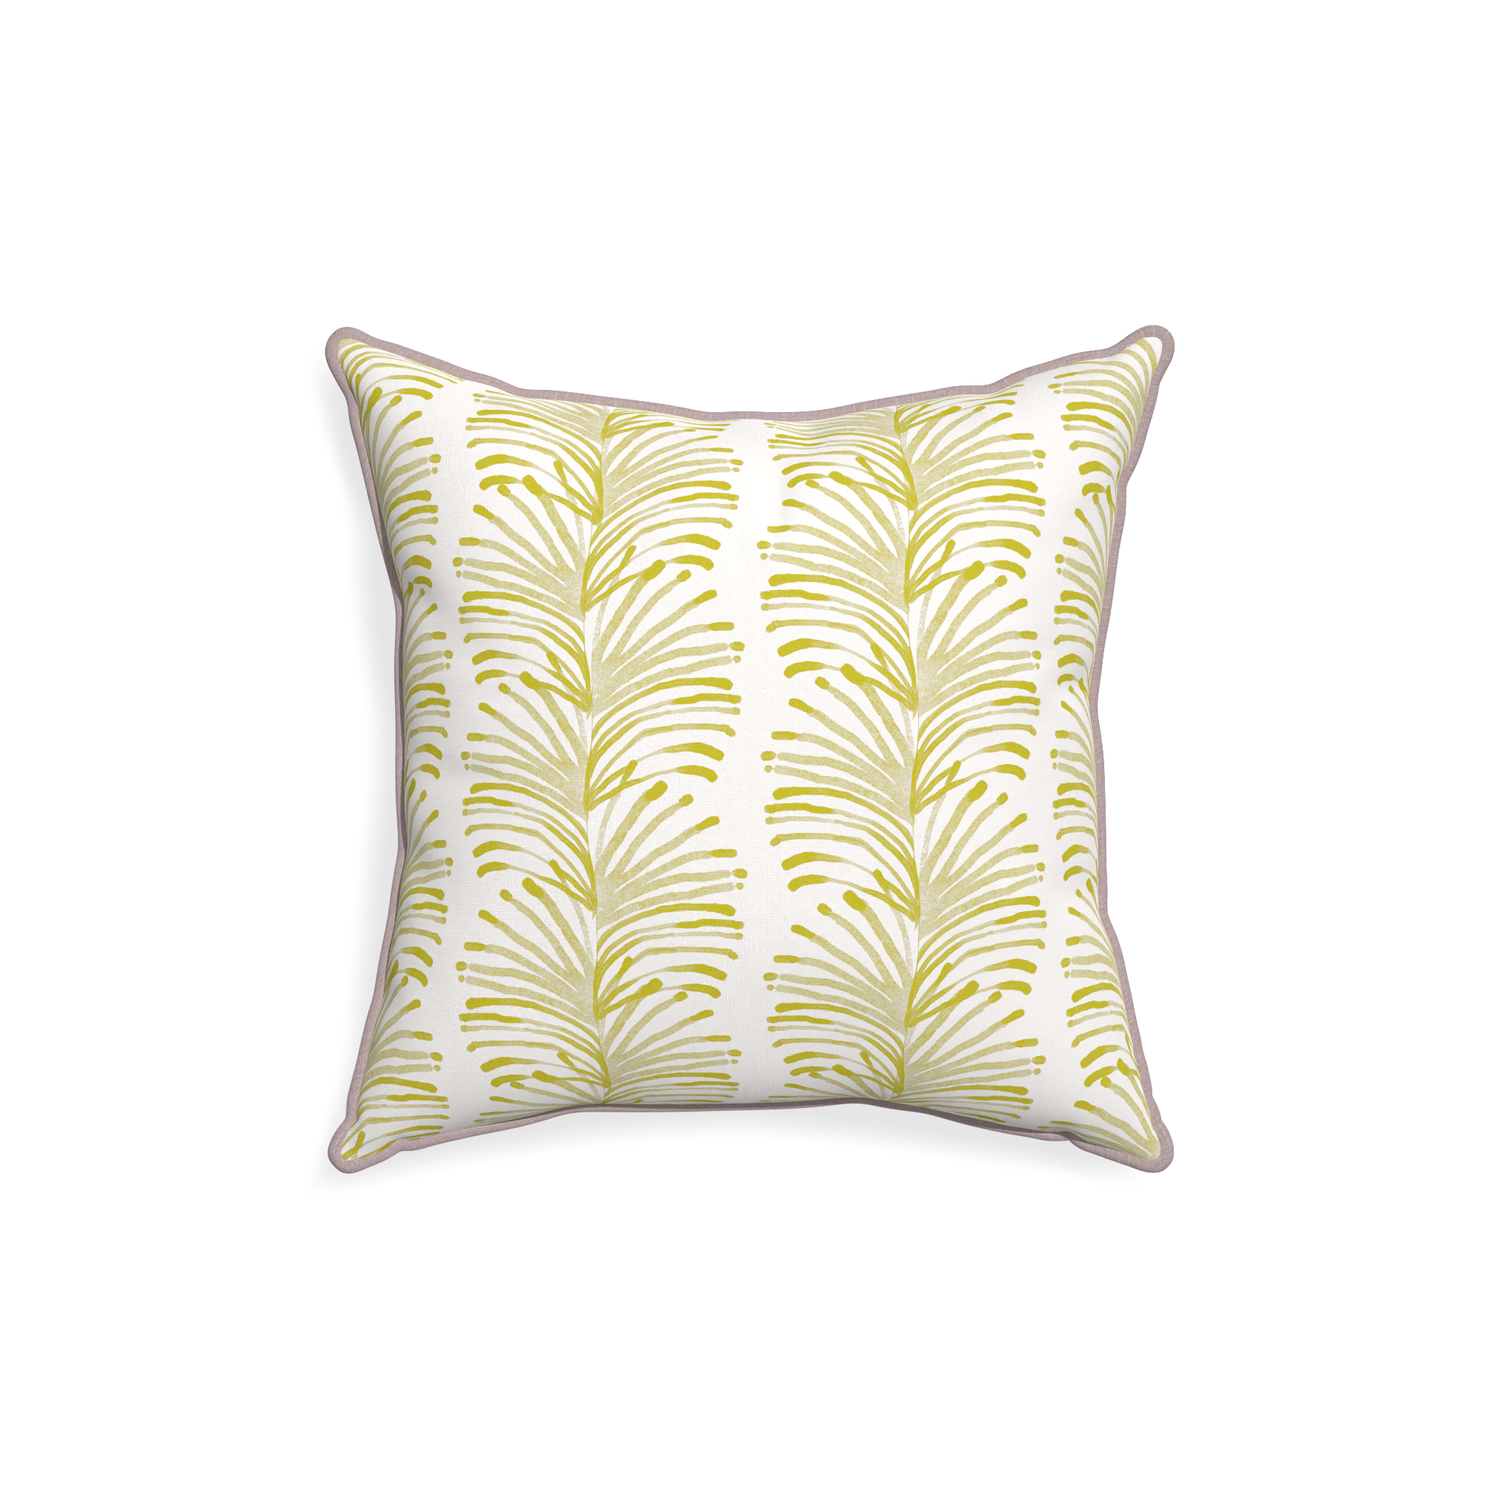 18-square emma chartreuse custom yellow stripe chartreusepillow with orchid piping on white background